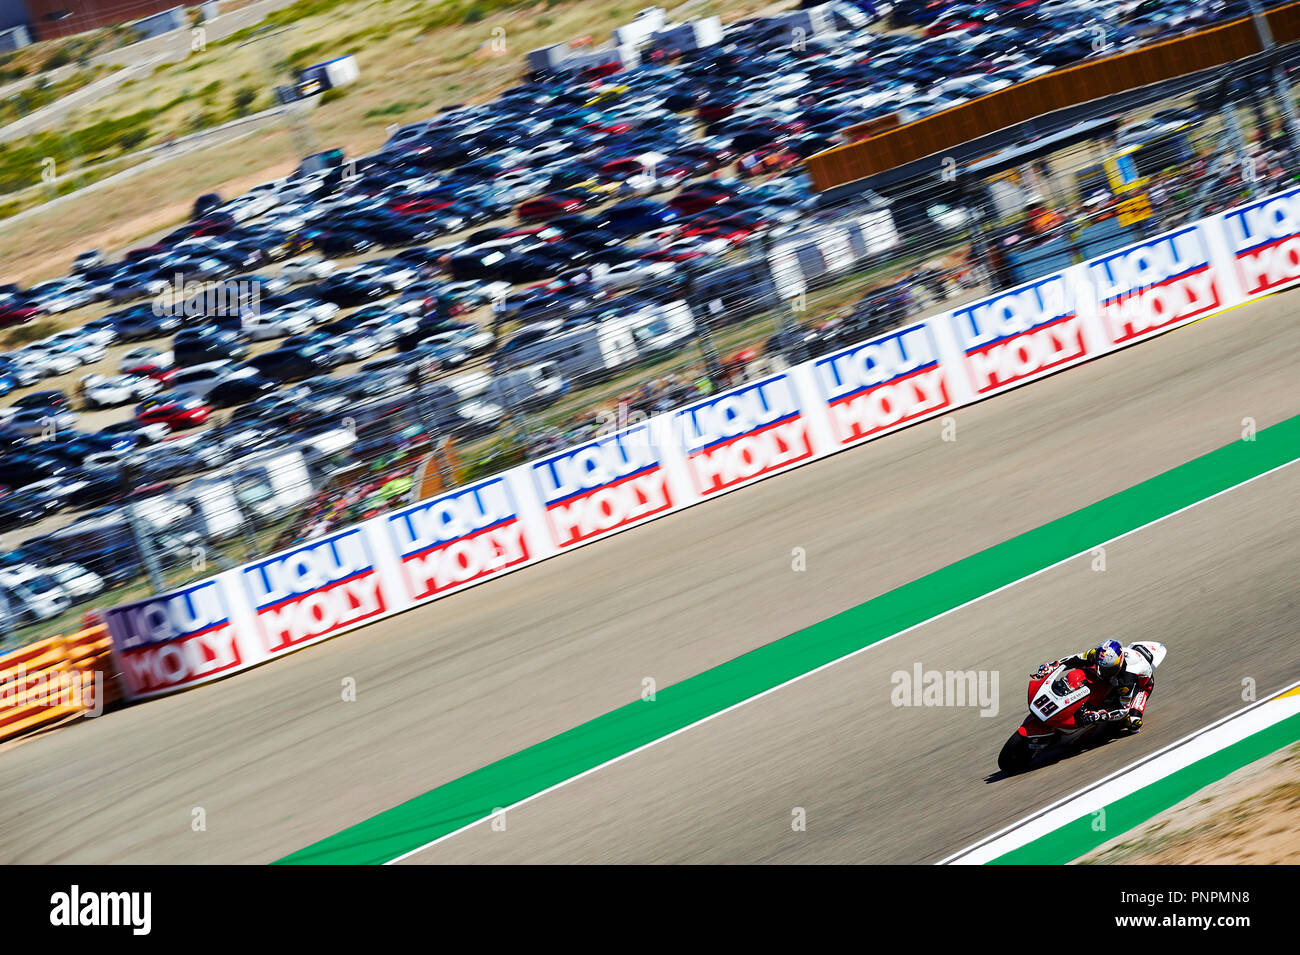 22nd September 2018, Ciudad del Motor de Aragon, Alcaniz, Spain; Motorcycling MotoGP of Aragon, Qualification; Khairul Idham Pawi of the IDEMITSU Honda Asia Moto2 Team rounds the bend during the qualifying Stock Photo